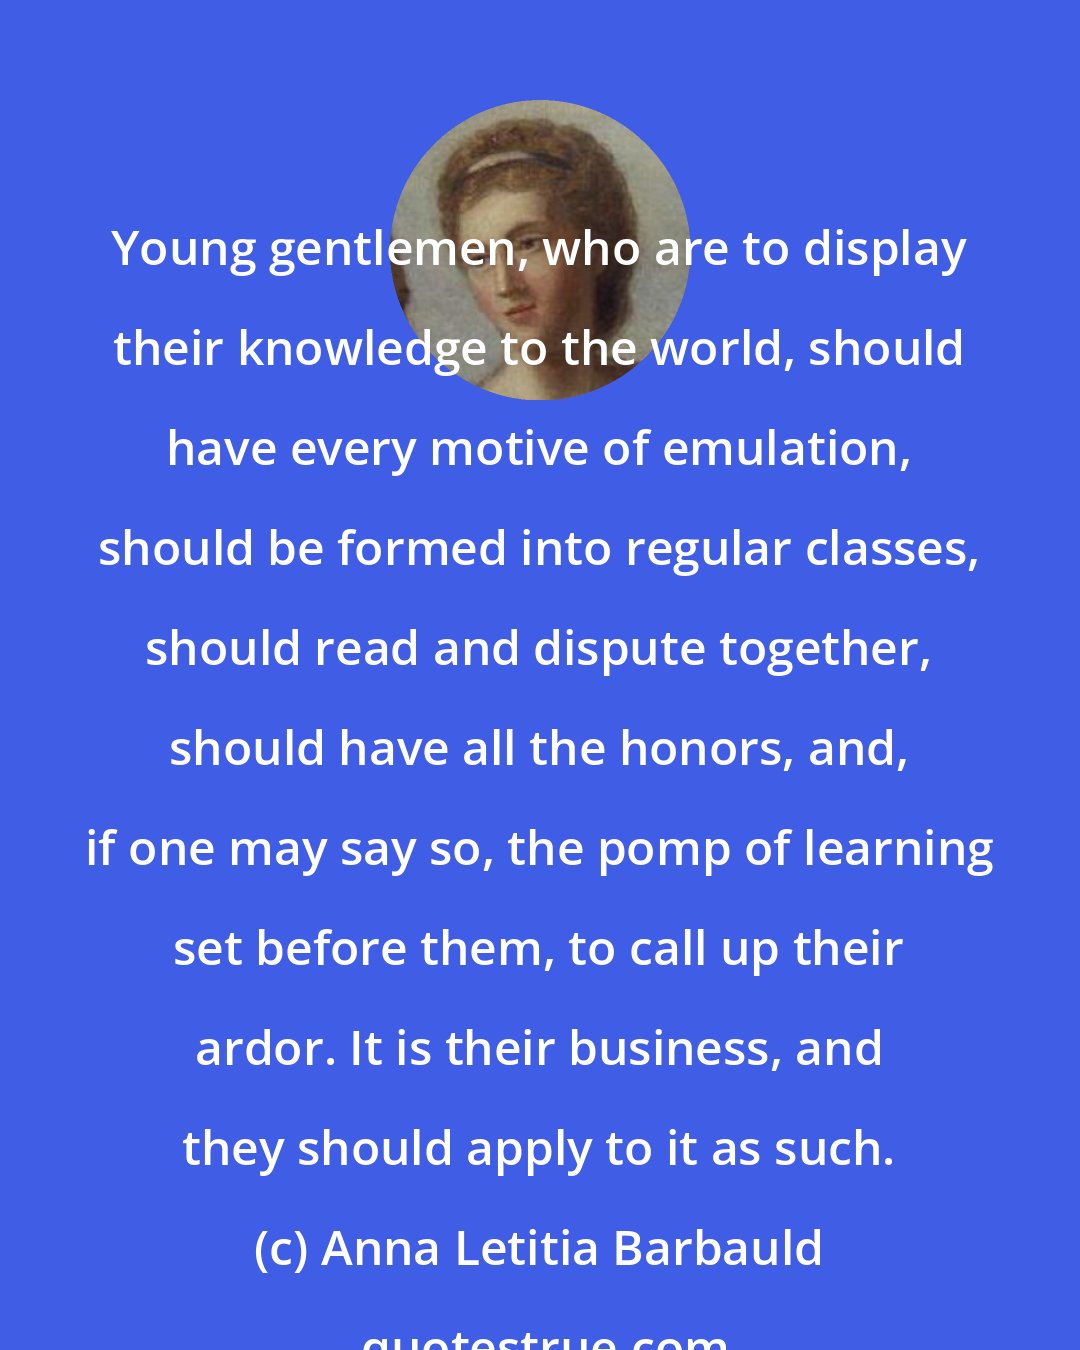 Anna Letitia Barbauld: Young gentlemen, who are to display their knowledge to the world, should have every motive of emulation, should be formed into regular classes, should read and dispute together, should have all the honors, and, if one may say so, the pomp of learning set before them, to call up their ardor. It is their business, and they should apply to it as such.